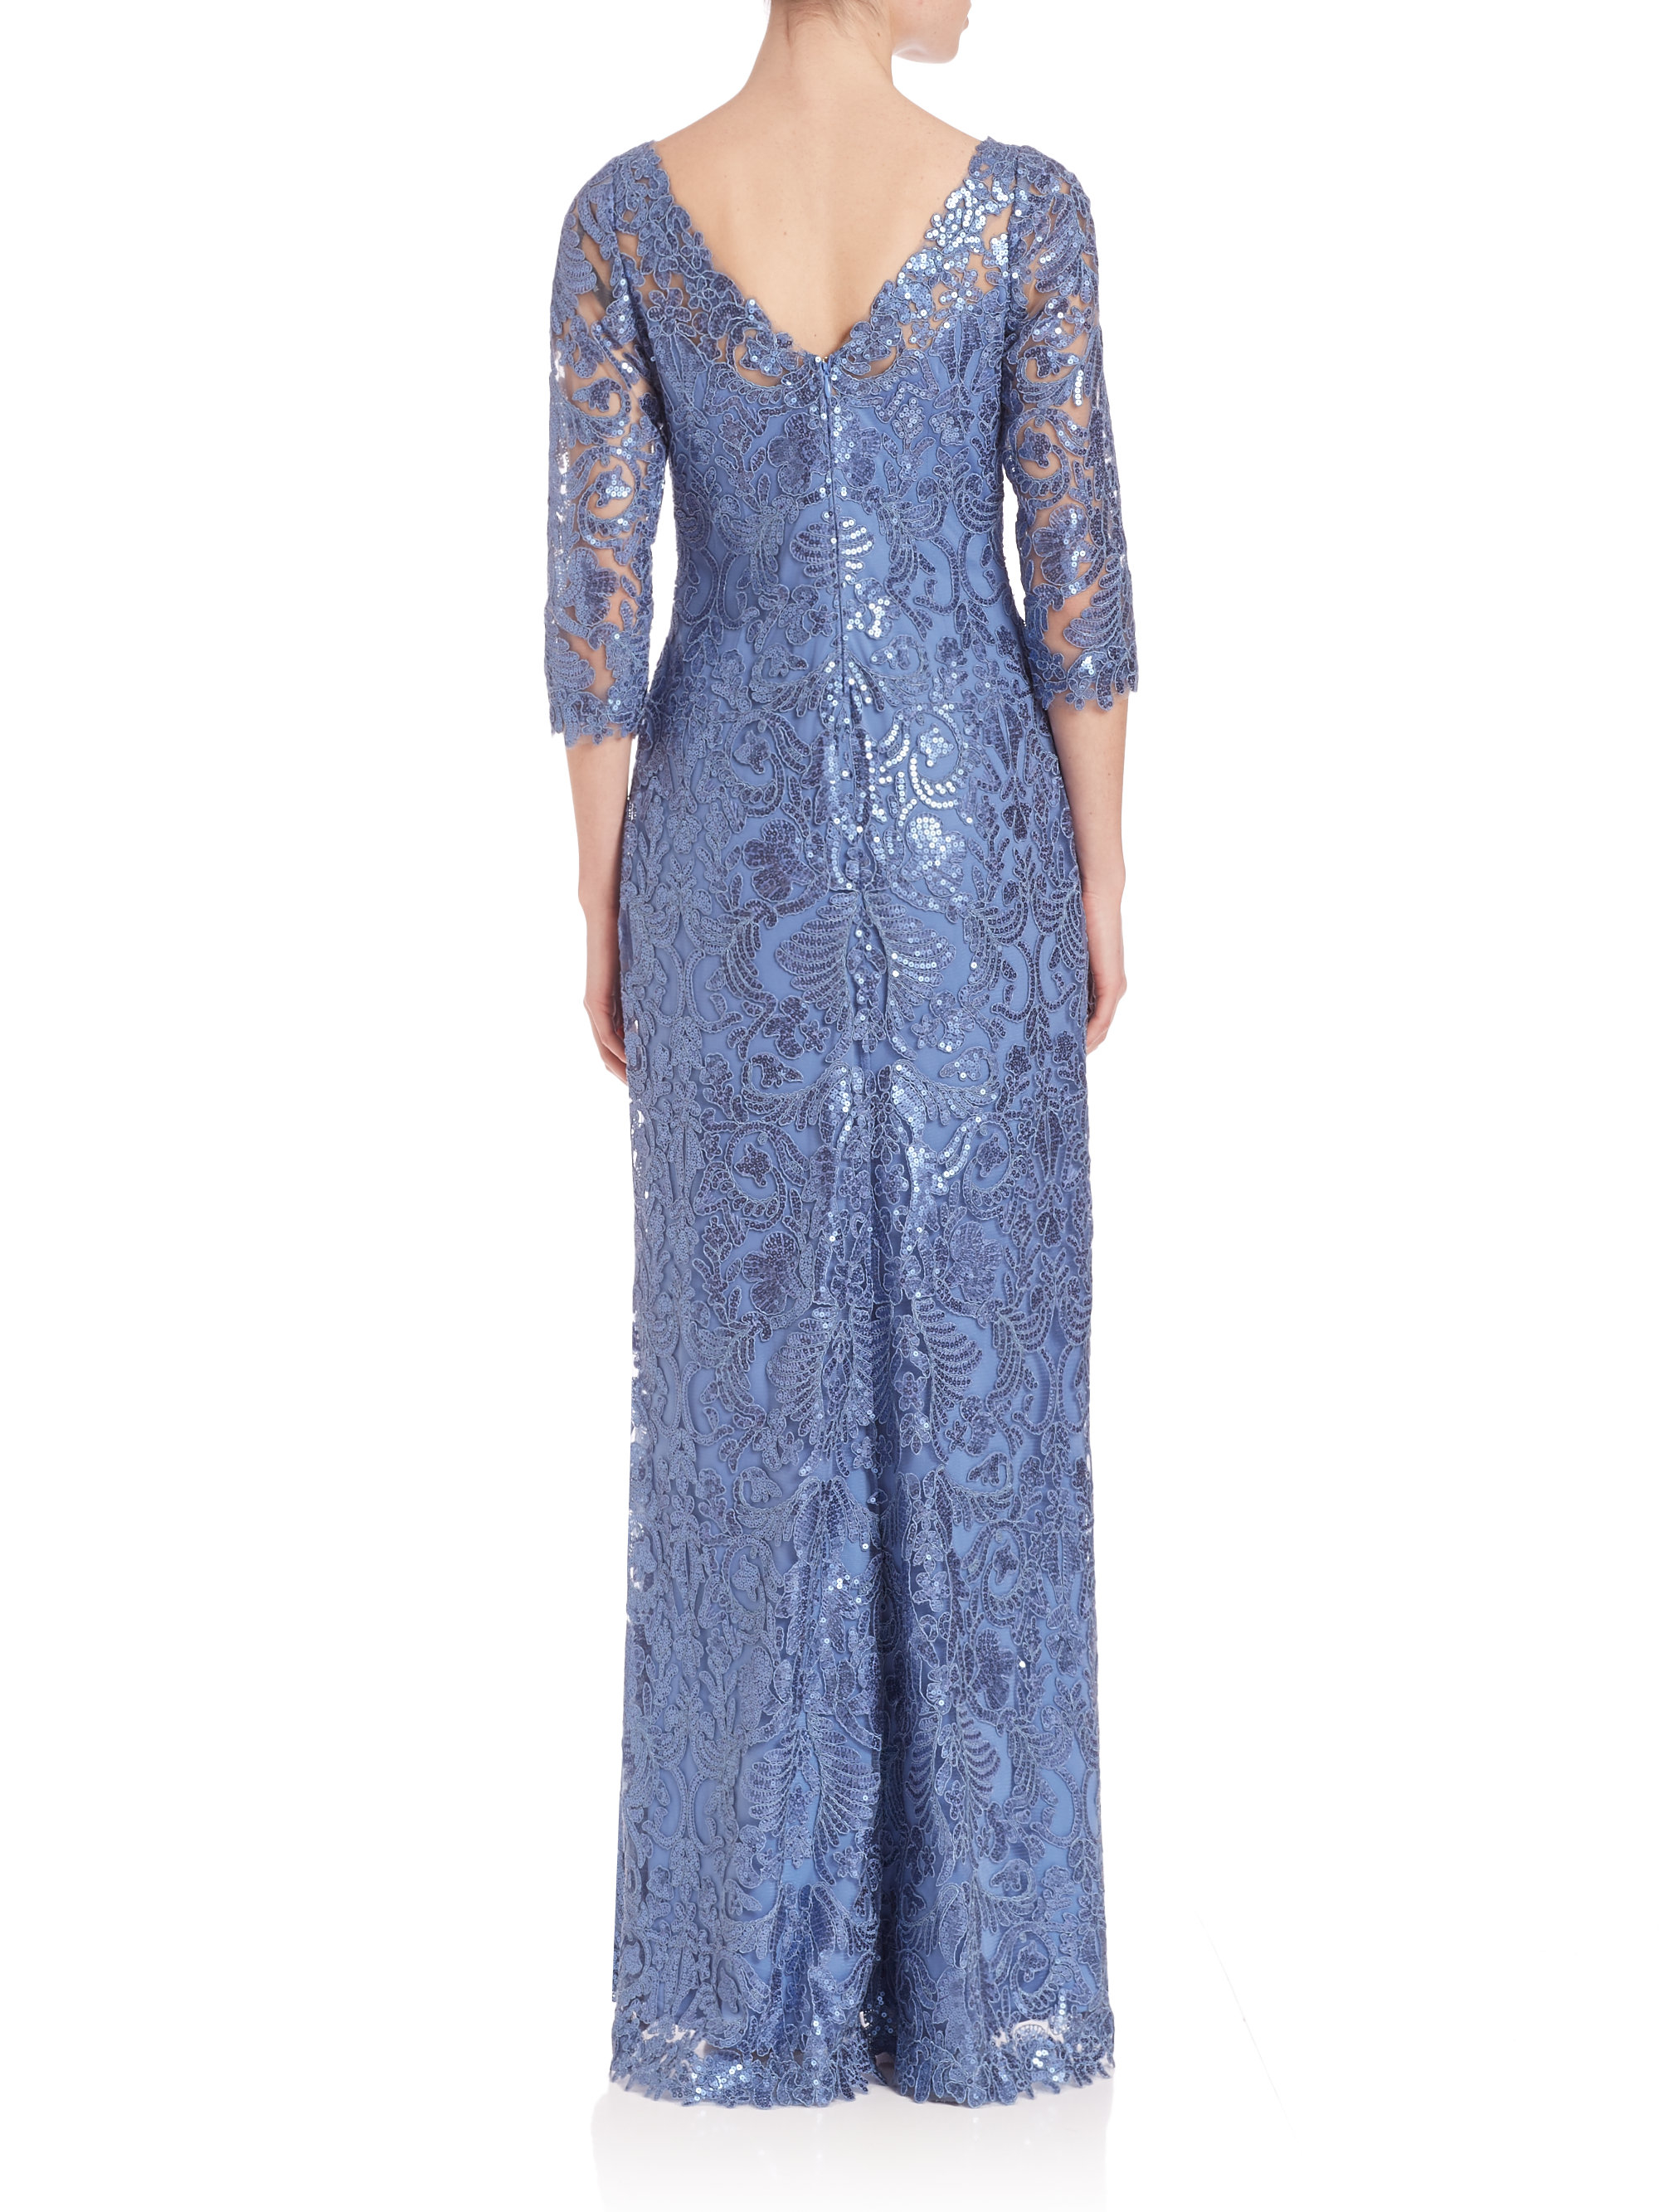 Lyst - Tadashi Shoji Sequin-embellished Lace Gown in Blue